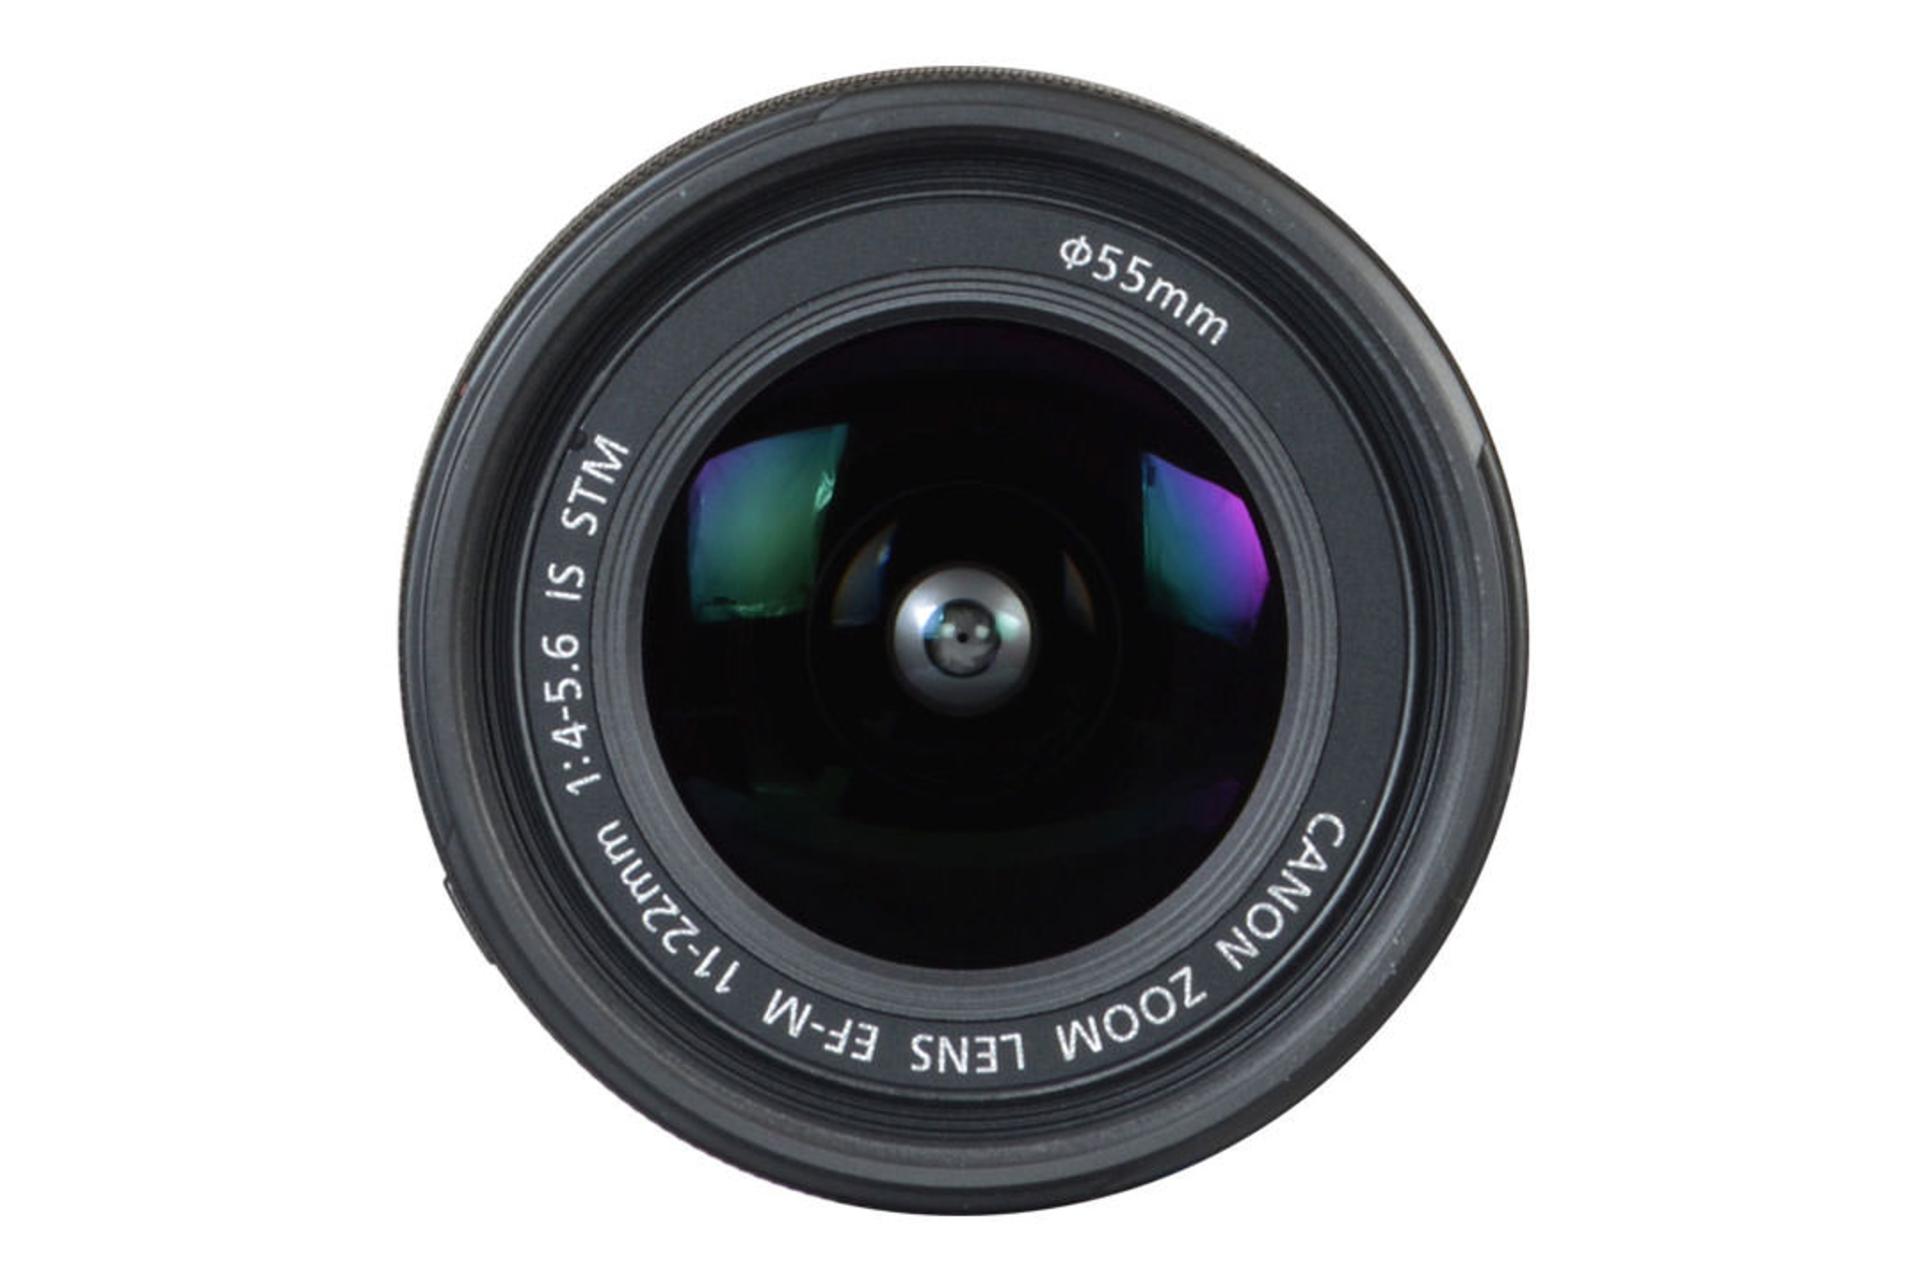 Canon EF-M 11-22mm f/4-5.6 IS STM	